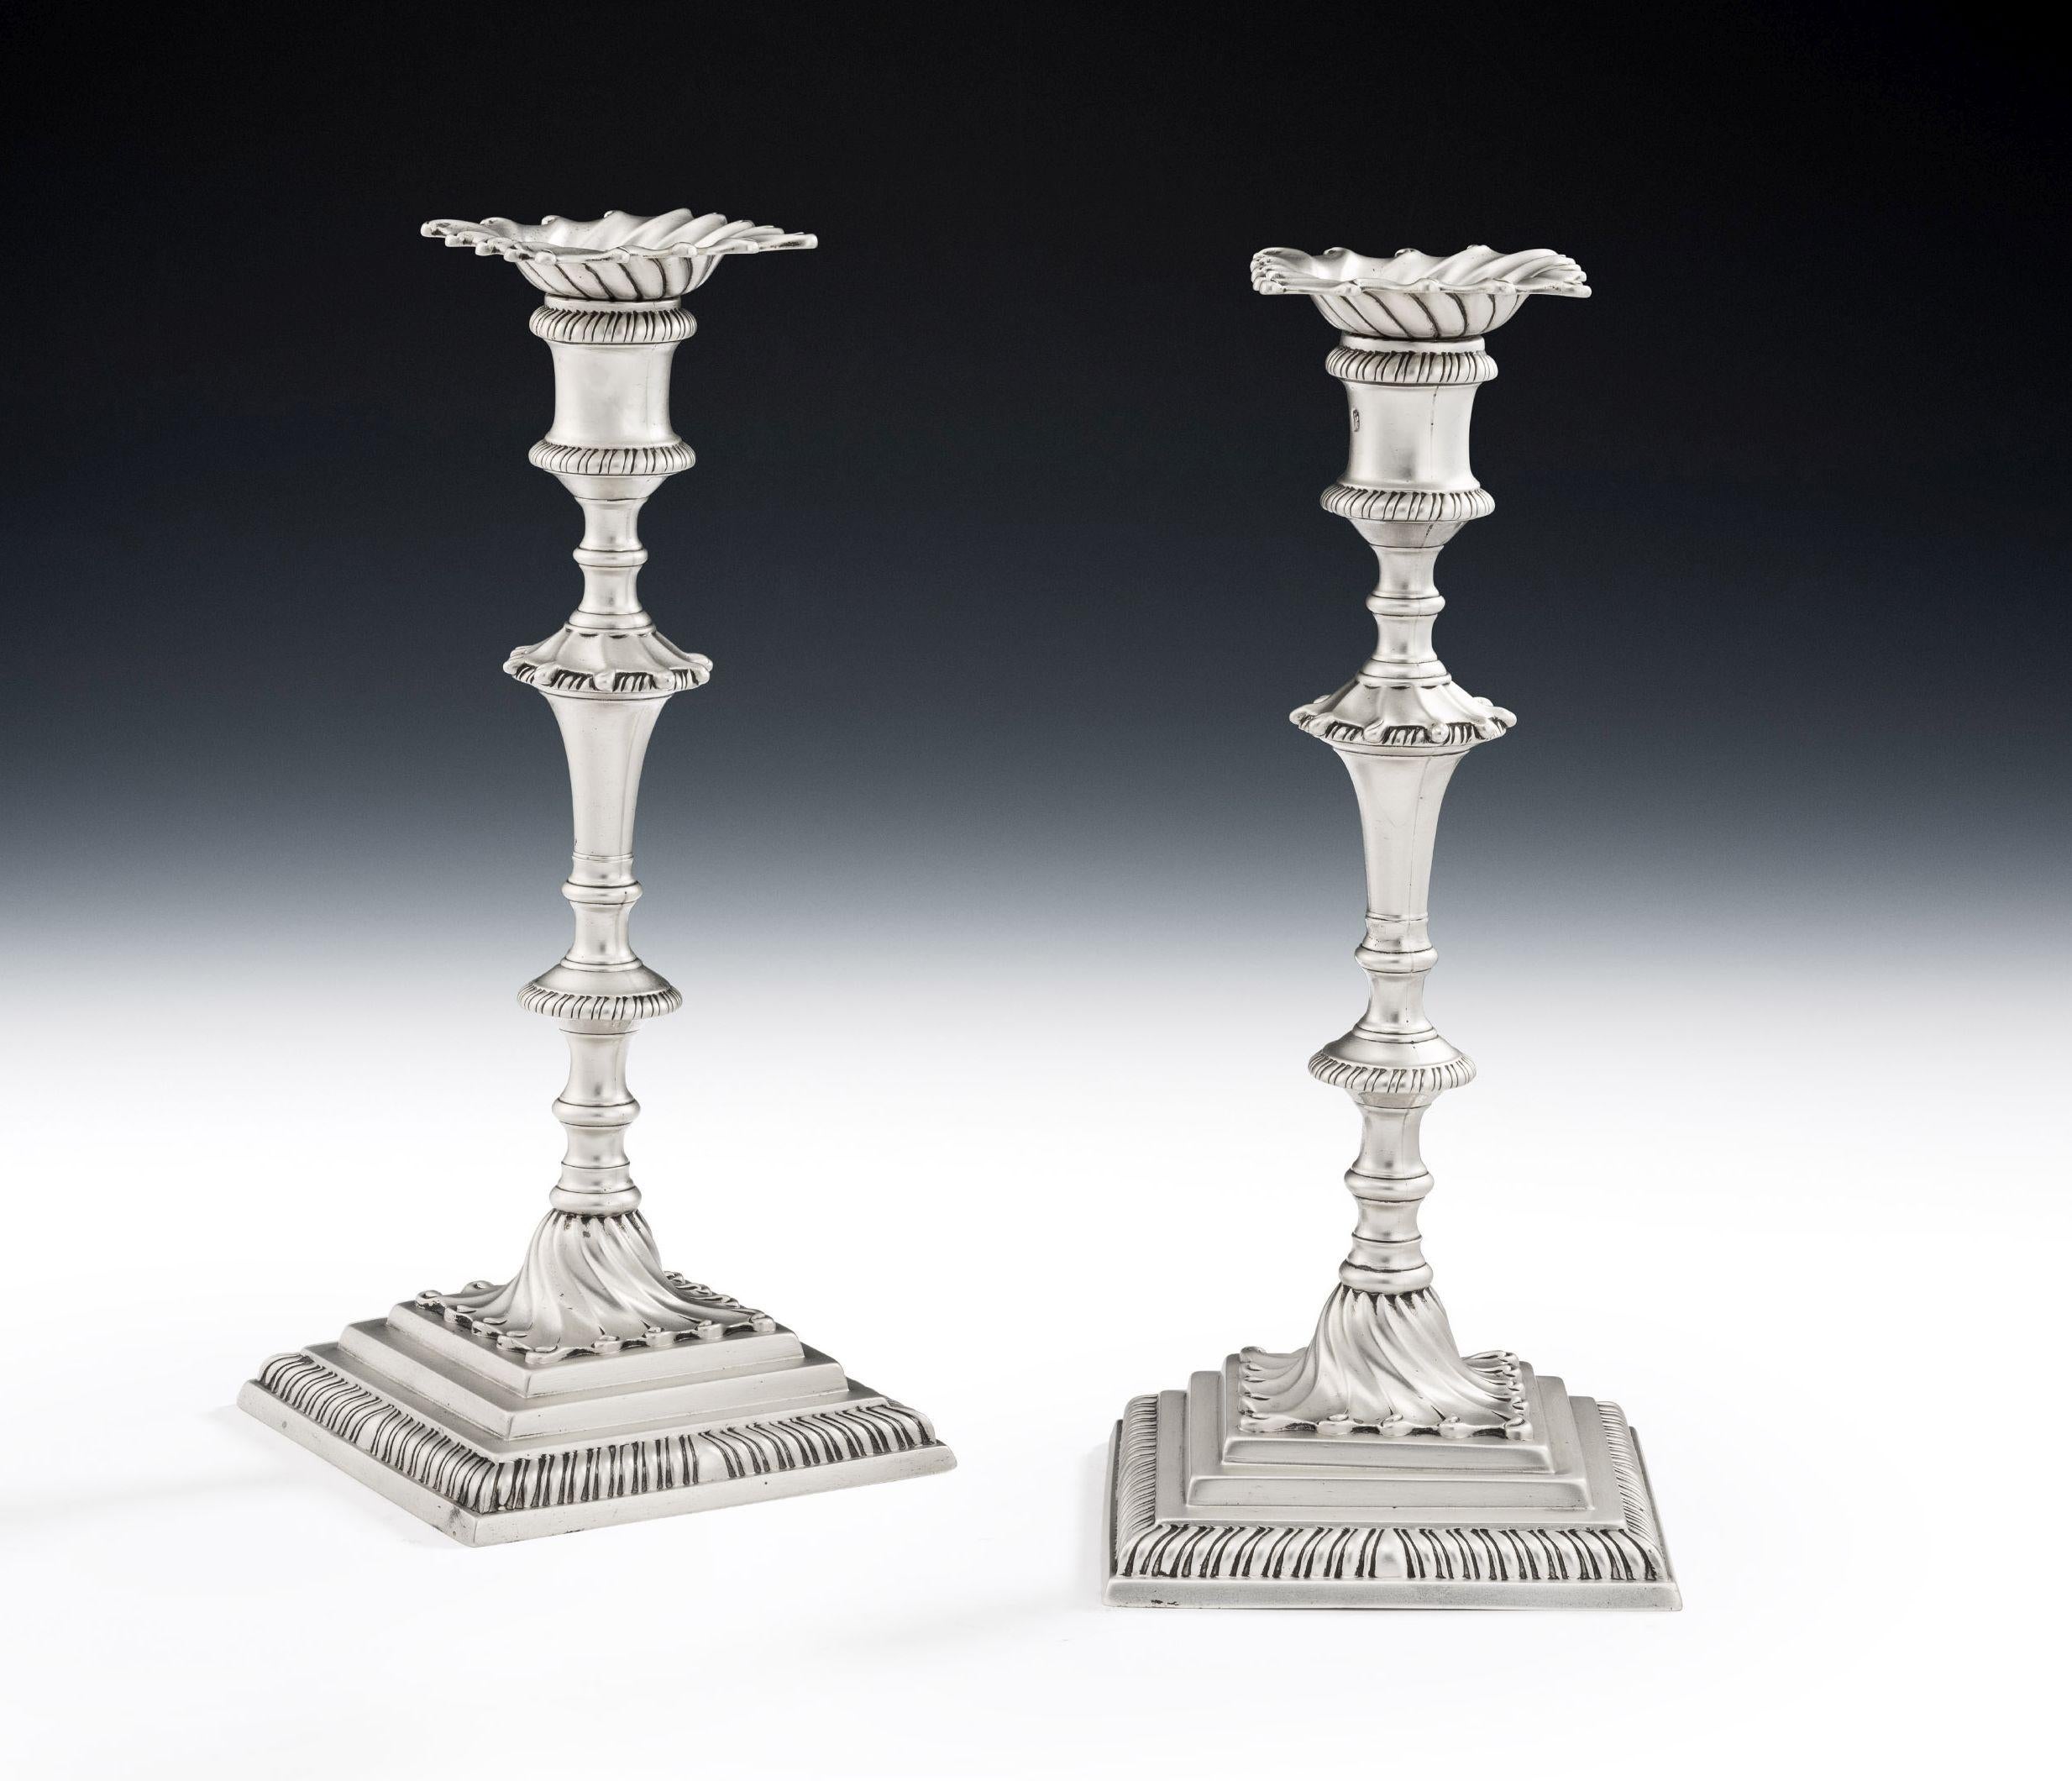 A very fine pair of early George III Cast Candlesticks made in London in 1771 by the specialist Candlestick maker, Ebenezer Coker.

The Candlesticks stand on a stepped square base which is decorated with gadrooning. The central shaped shaft is